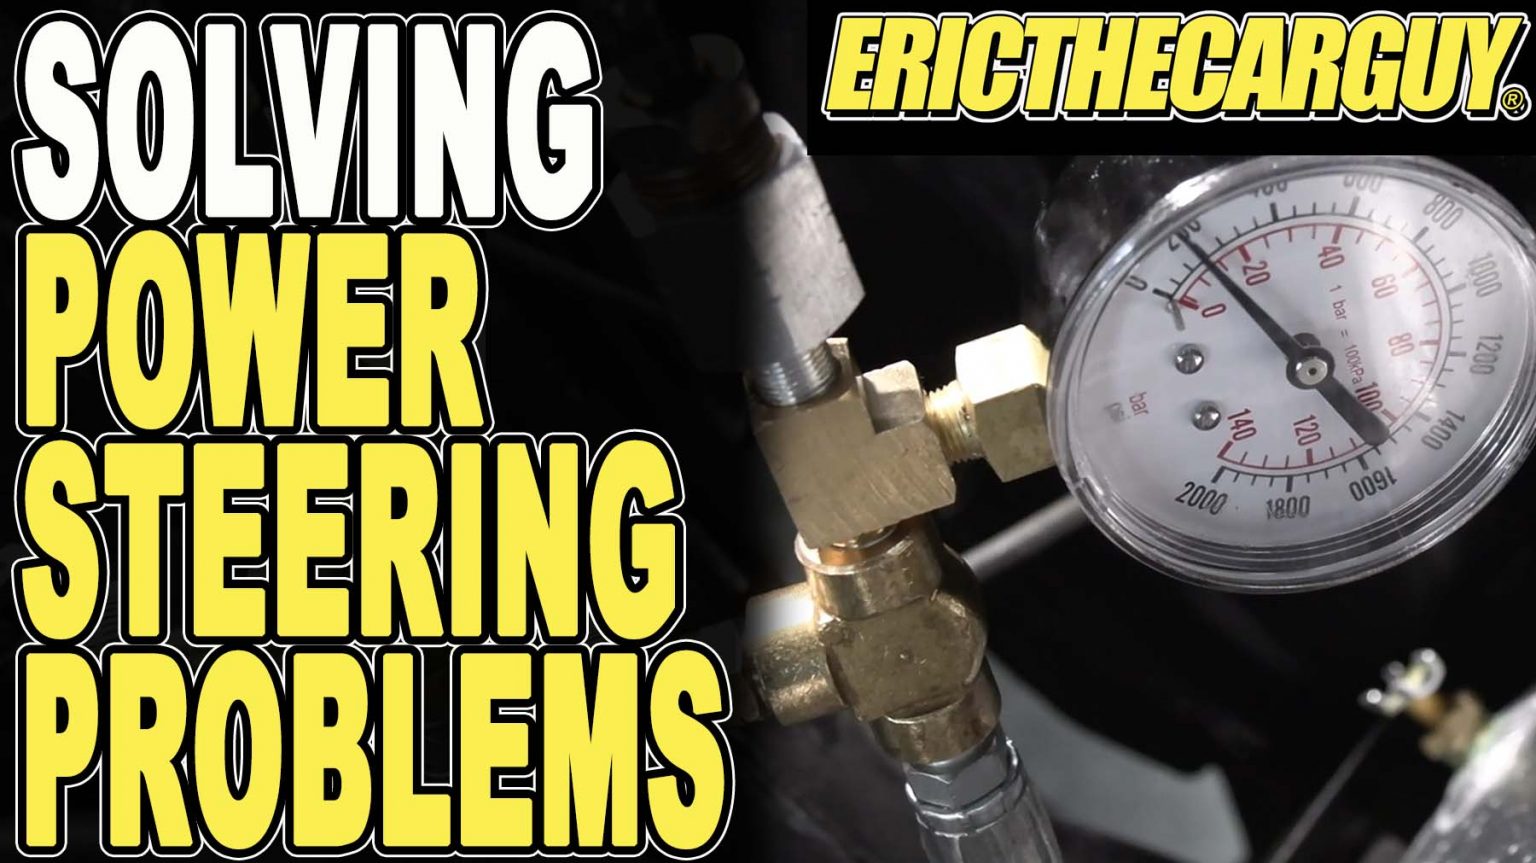 Solving Power Steering Problems | EricTheCarGuy